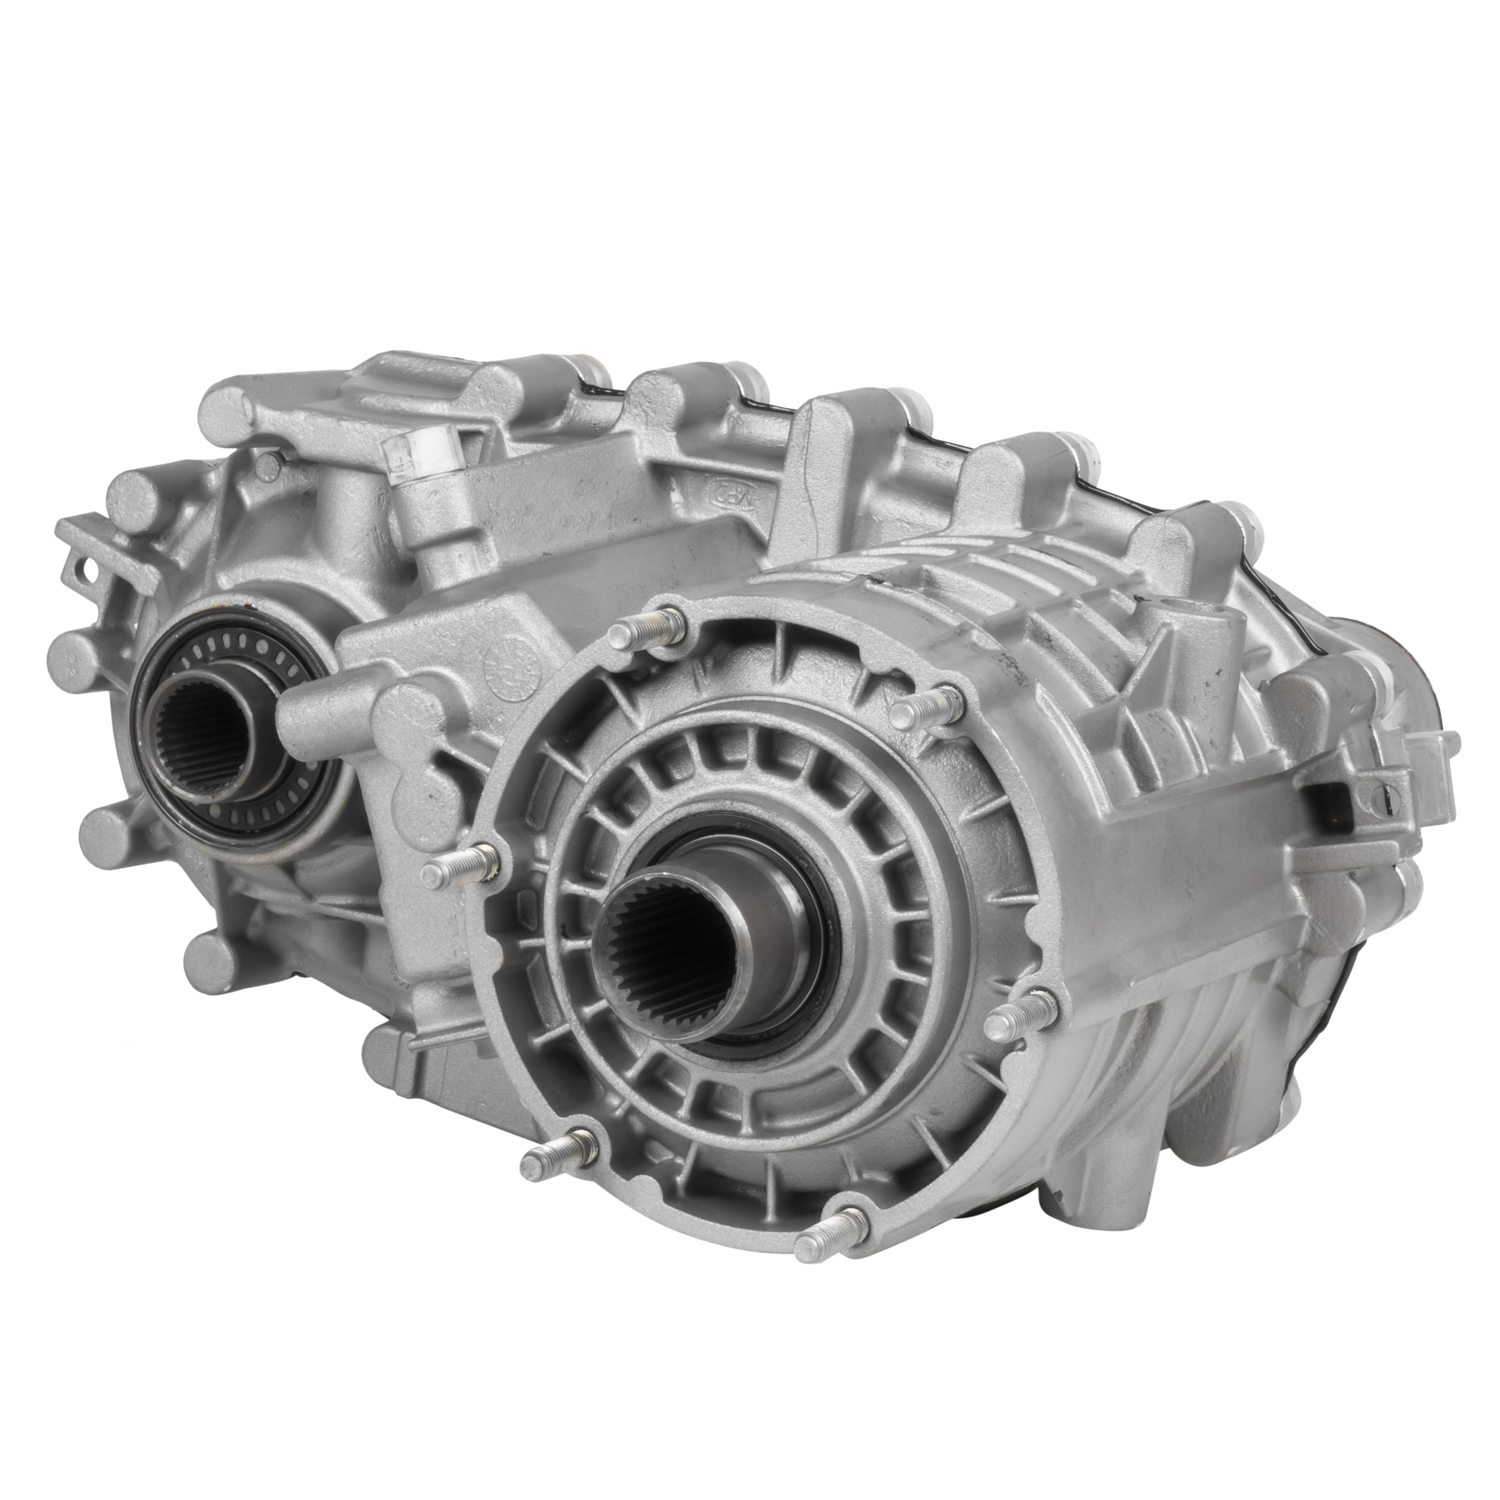 Zumbrota Remanufactured NP263 Transfer Case for 2001-07 GM Pickups